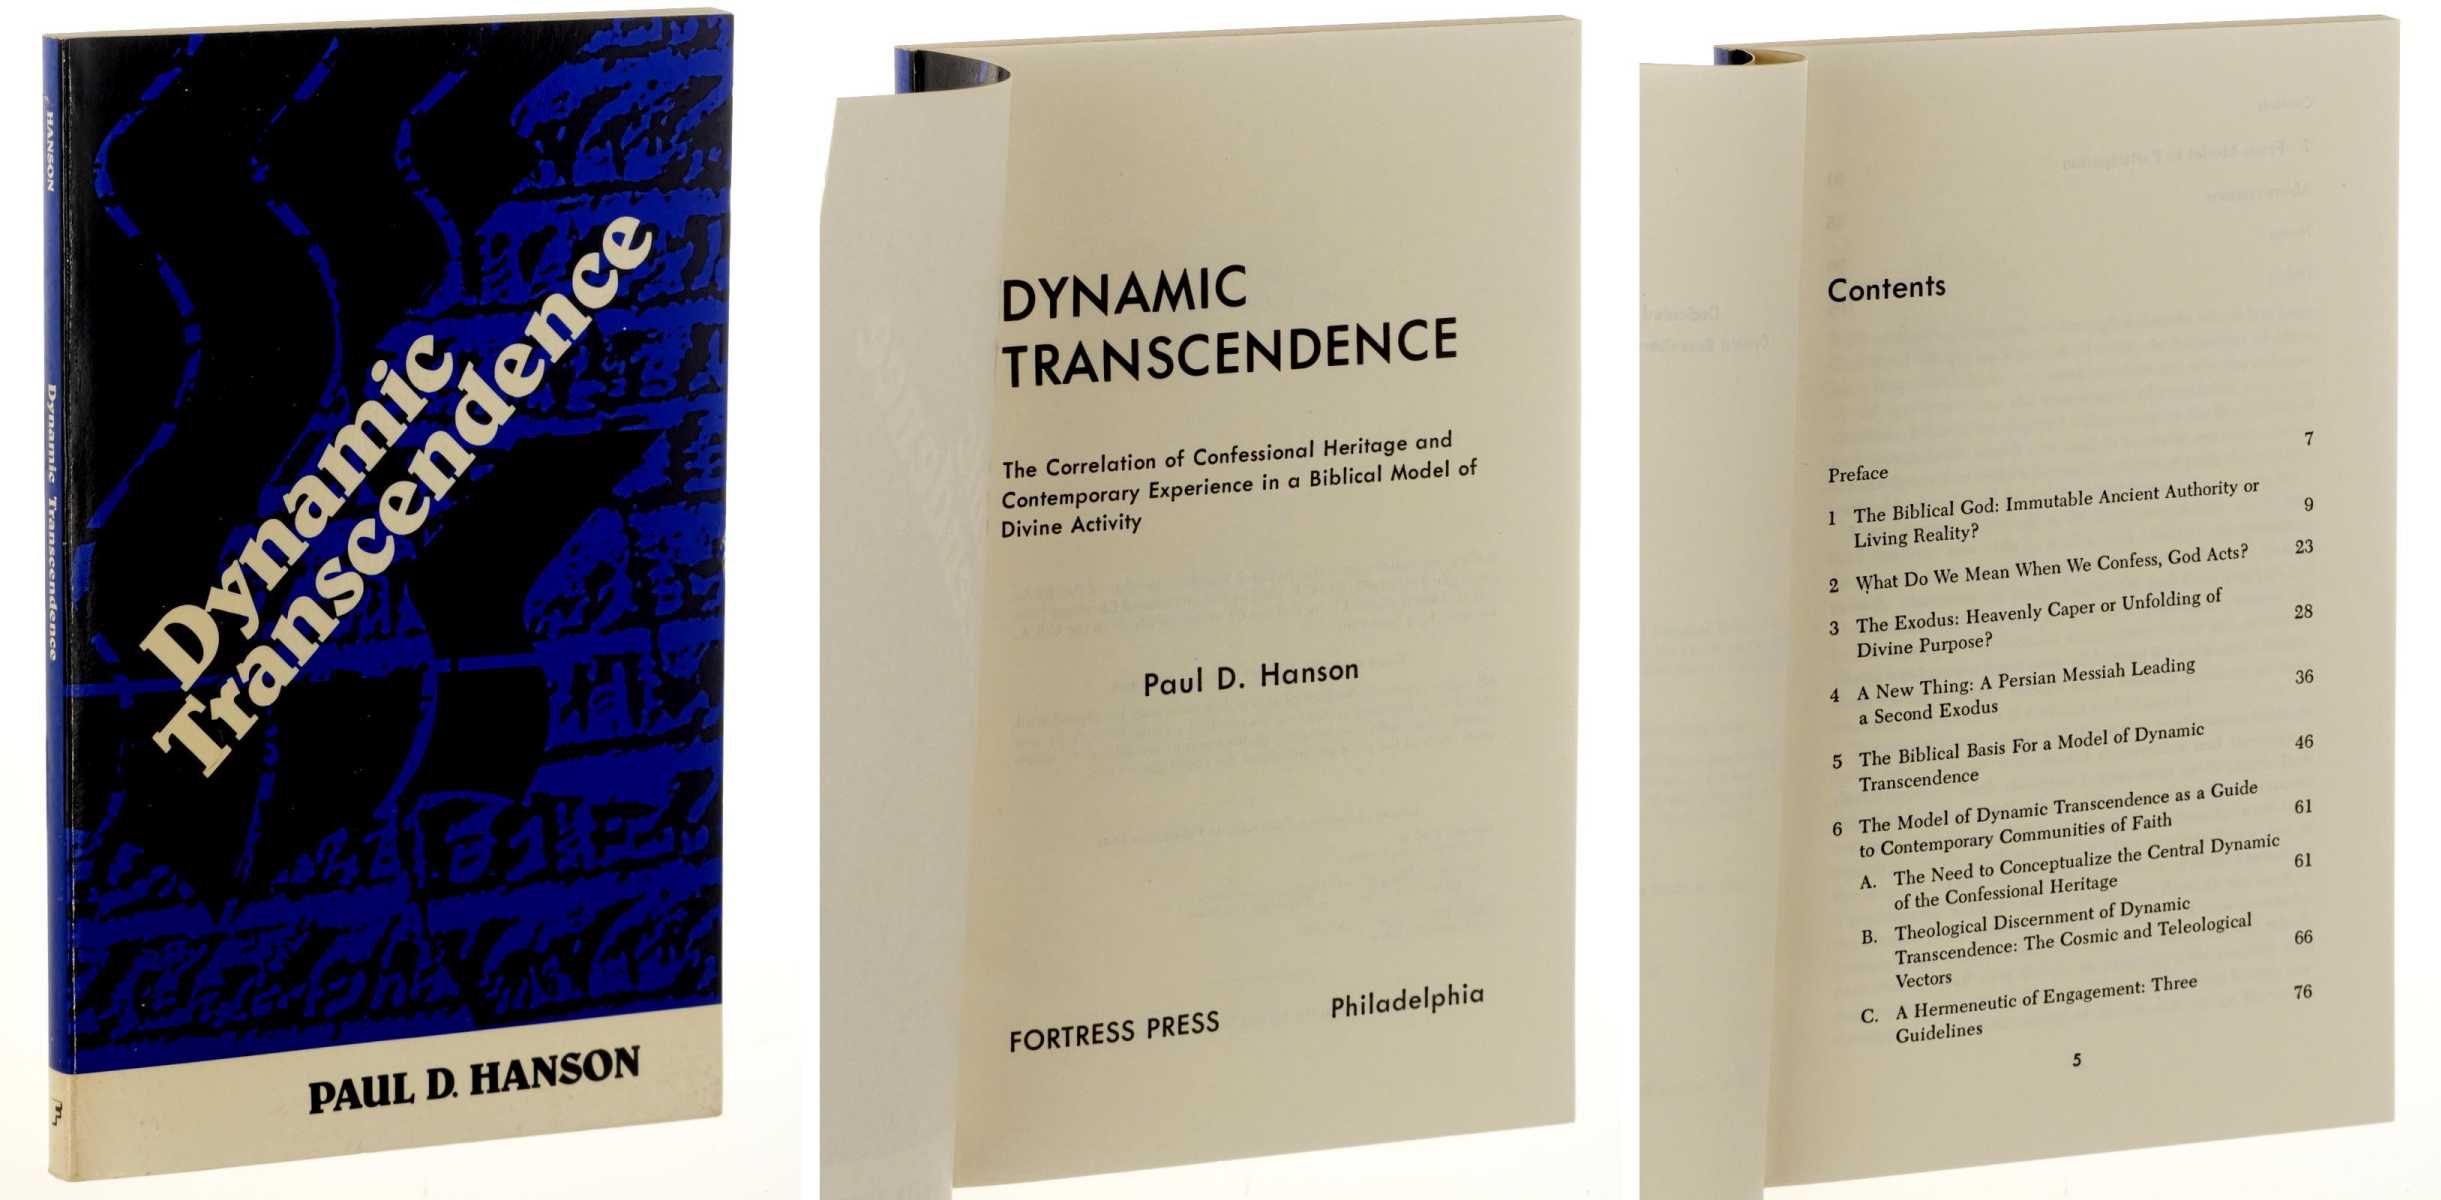 Hanson, Paul D.:  Dynamic Transcendence. Correlation of Confessional Heritage and Contemporary Experience in a Biblical Mode of Divine Activity. 